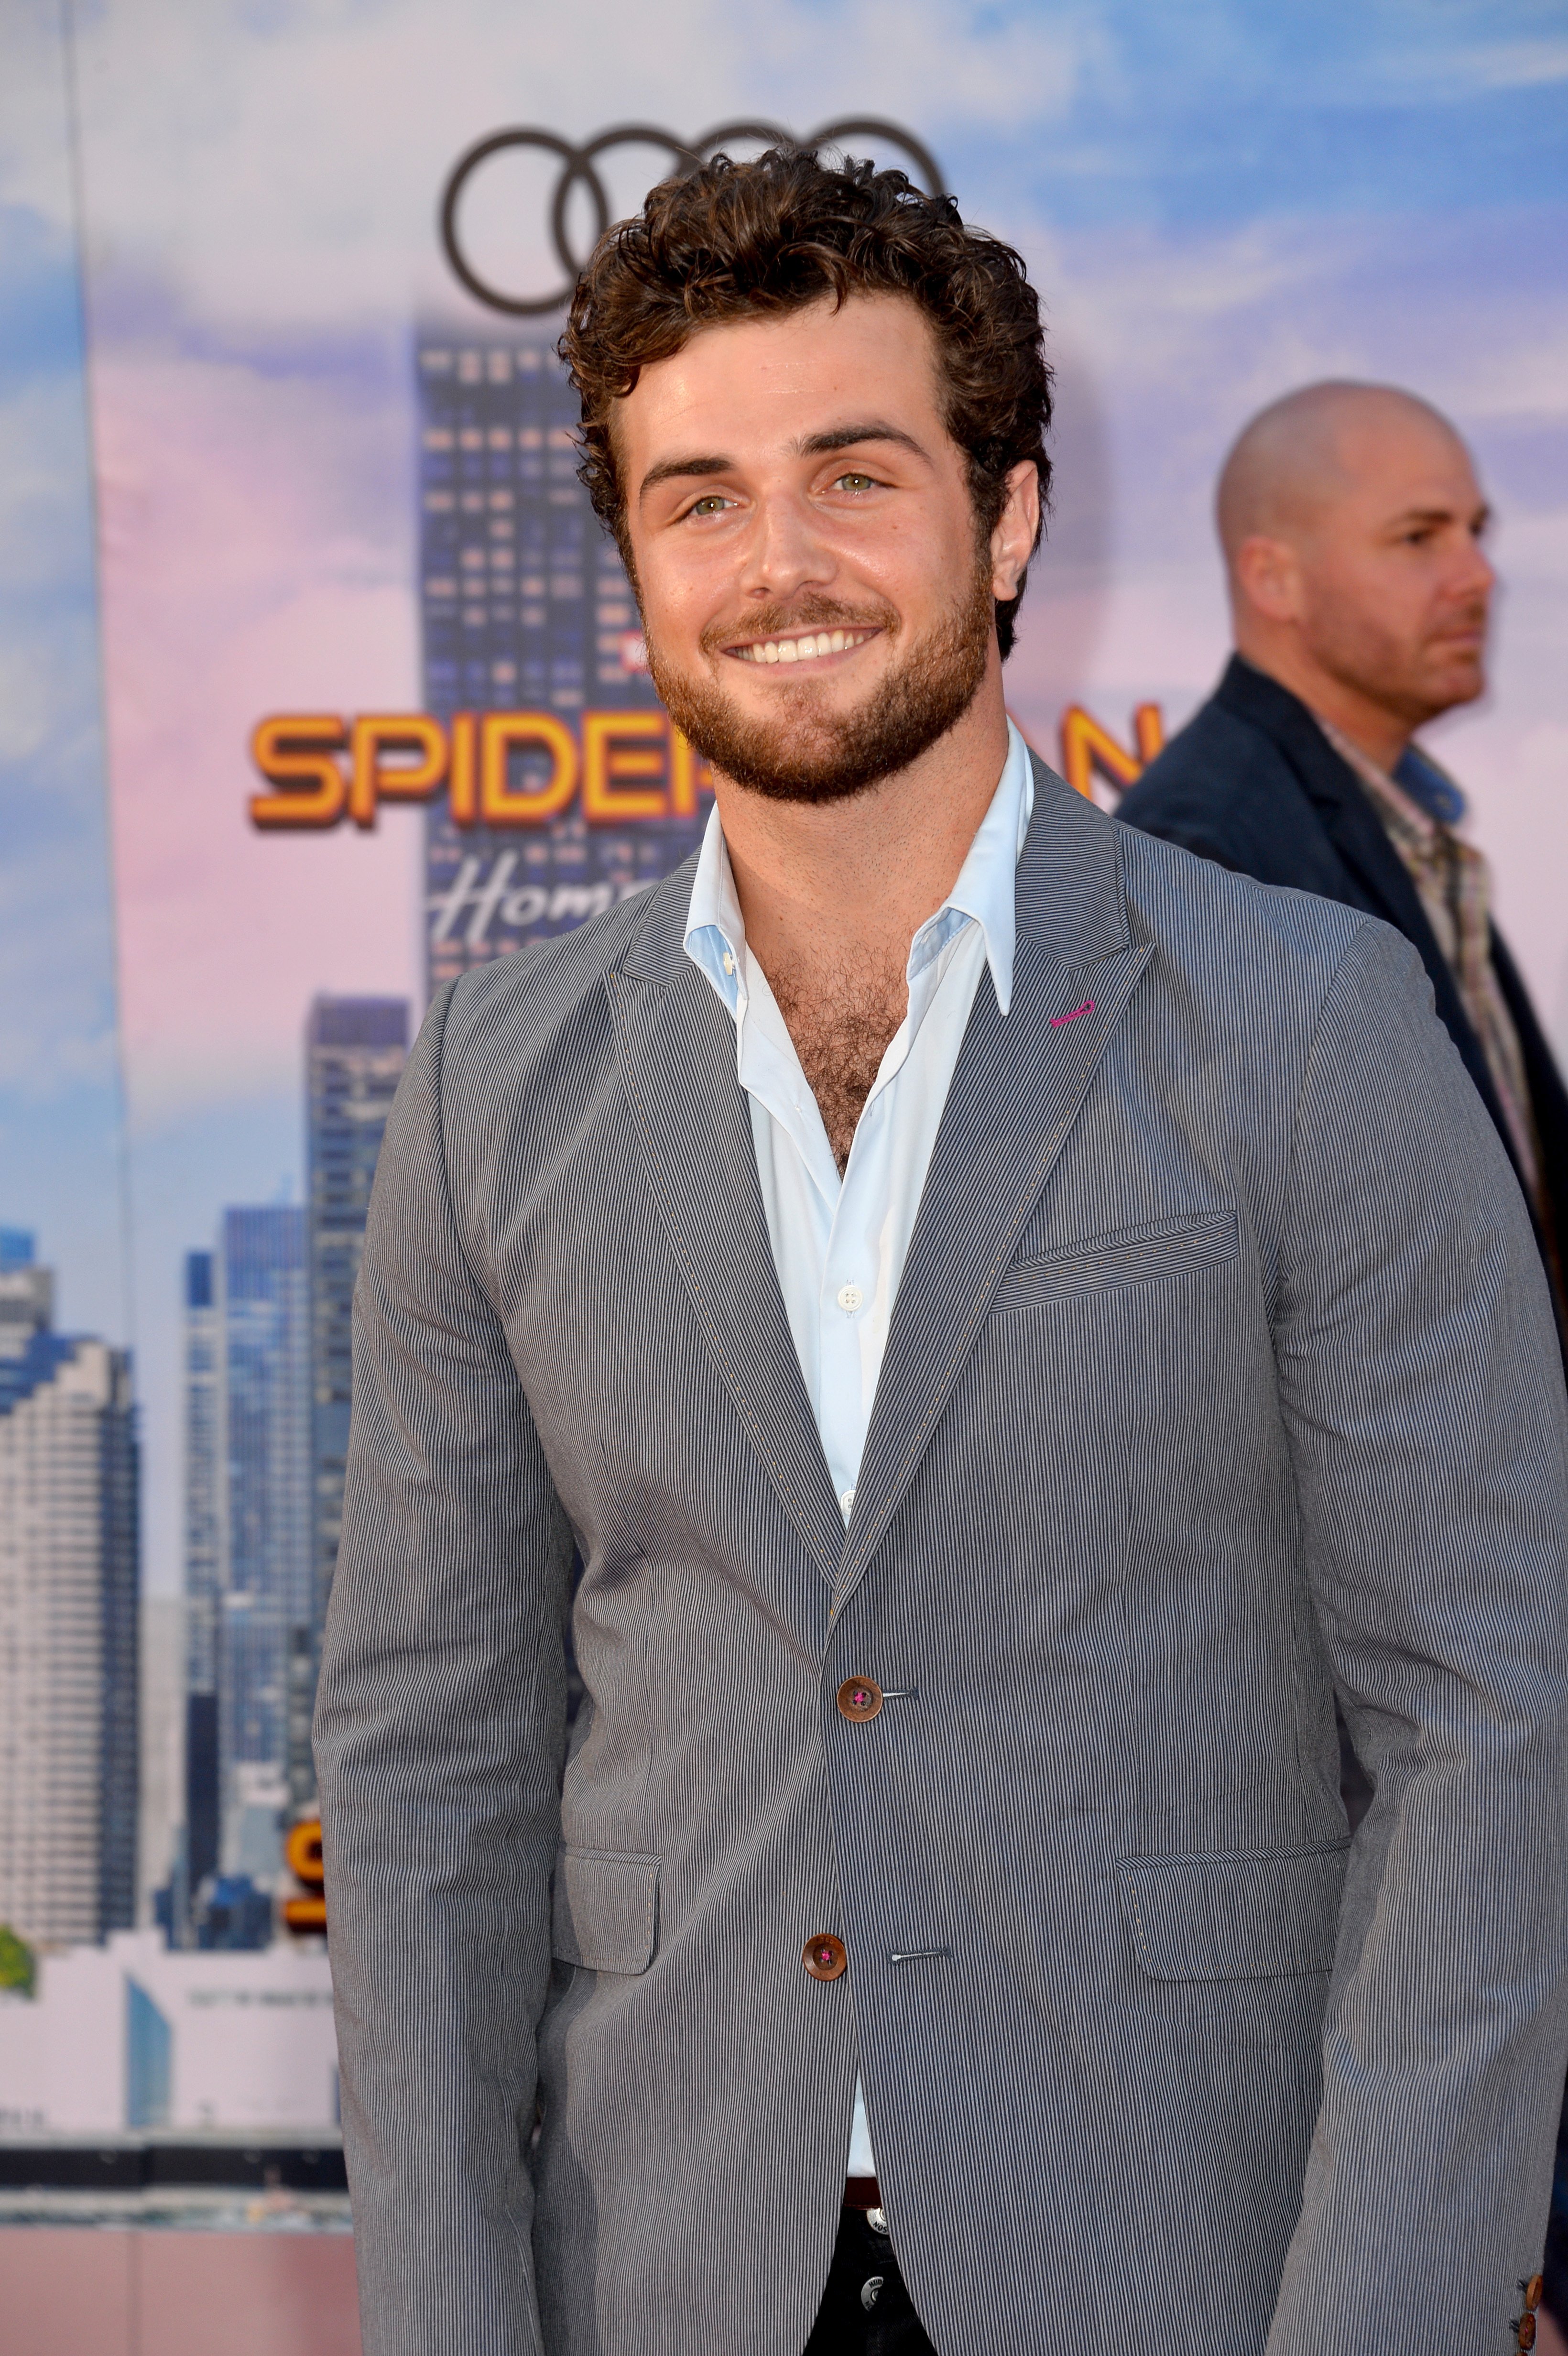 Beau Mirchoff at the world premiere of "Spider-Man: Homecoming" at the TCL Chinese Theatre in Hollywood, Los Angeles on June 28, 2017 | Photo: Shutterstock/Jaguar PS